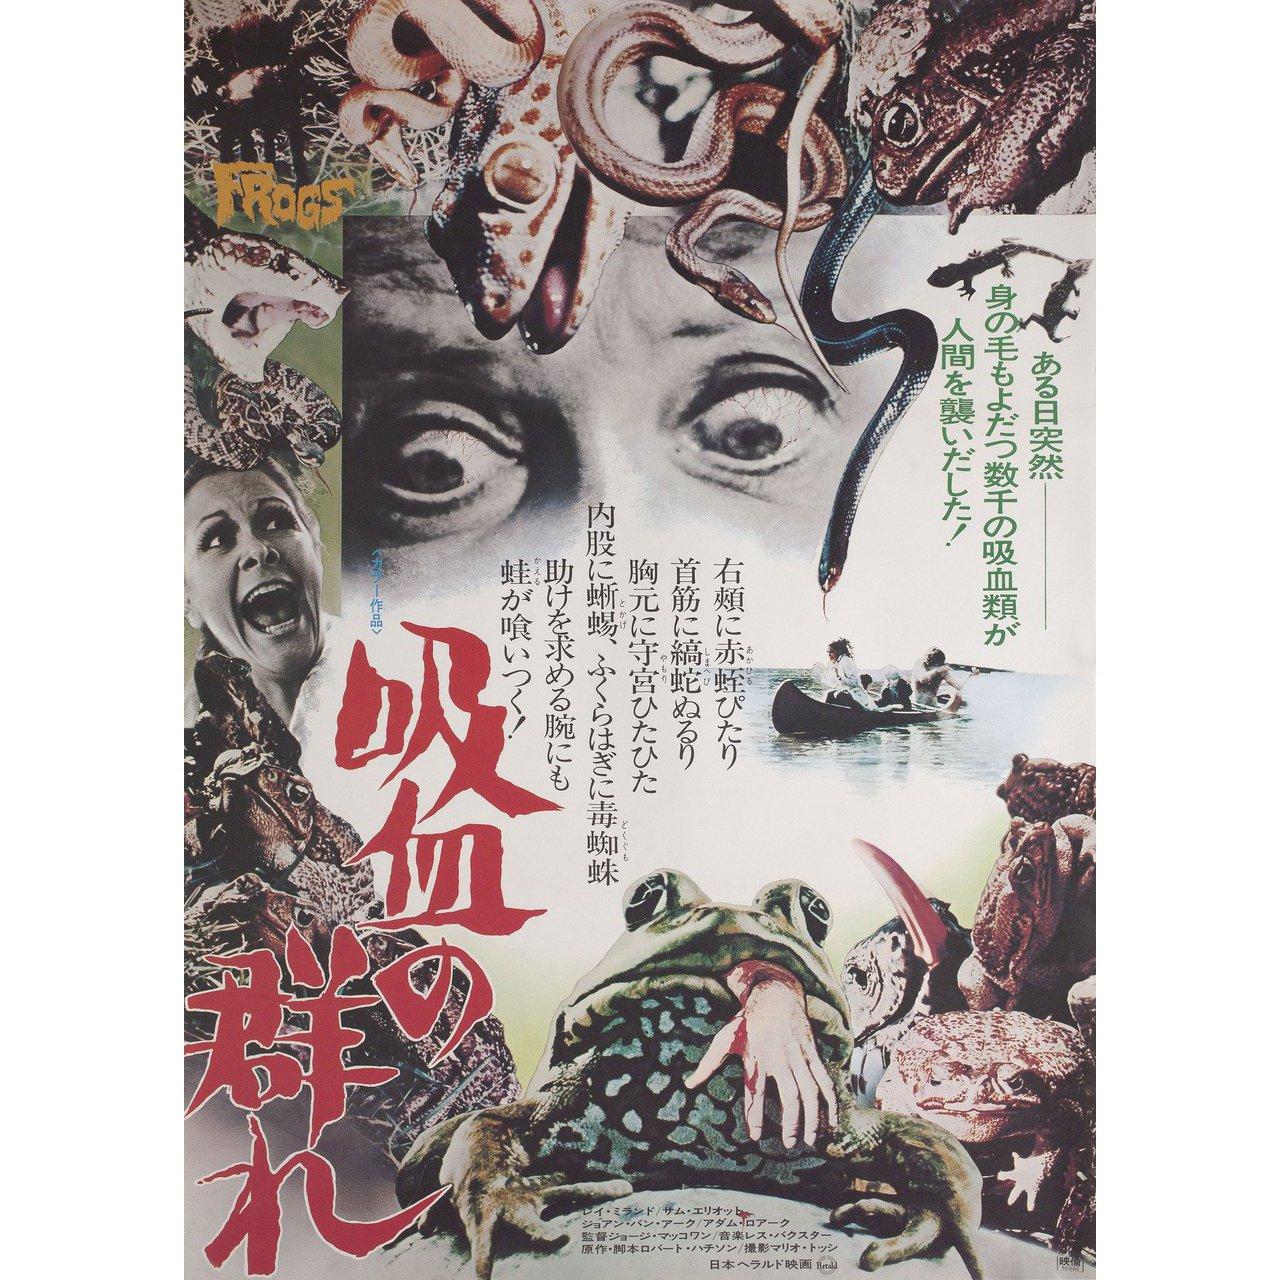 Late 20th Century Frogs 1975 Japanese B2 Film Poster